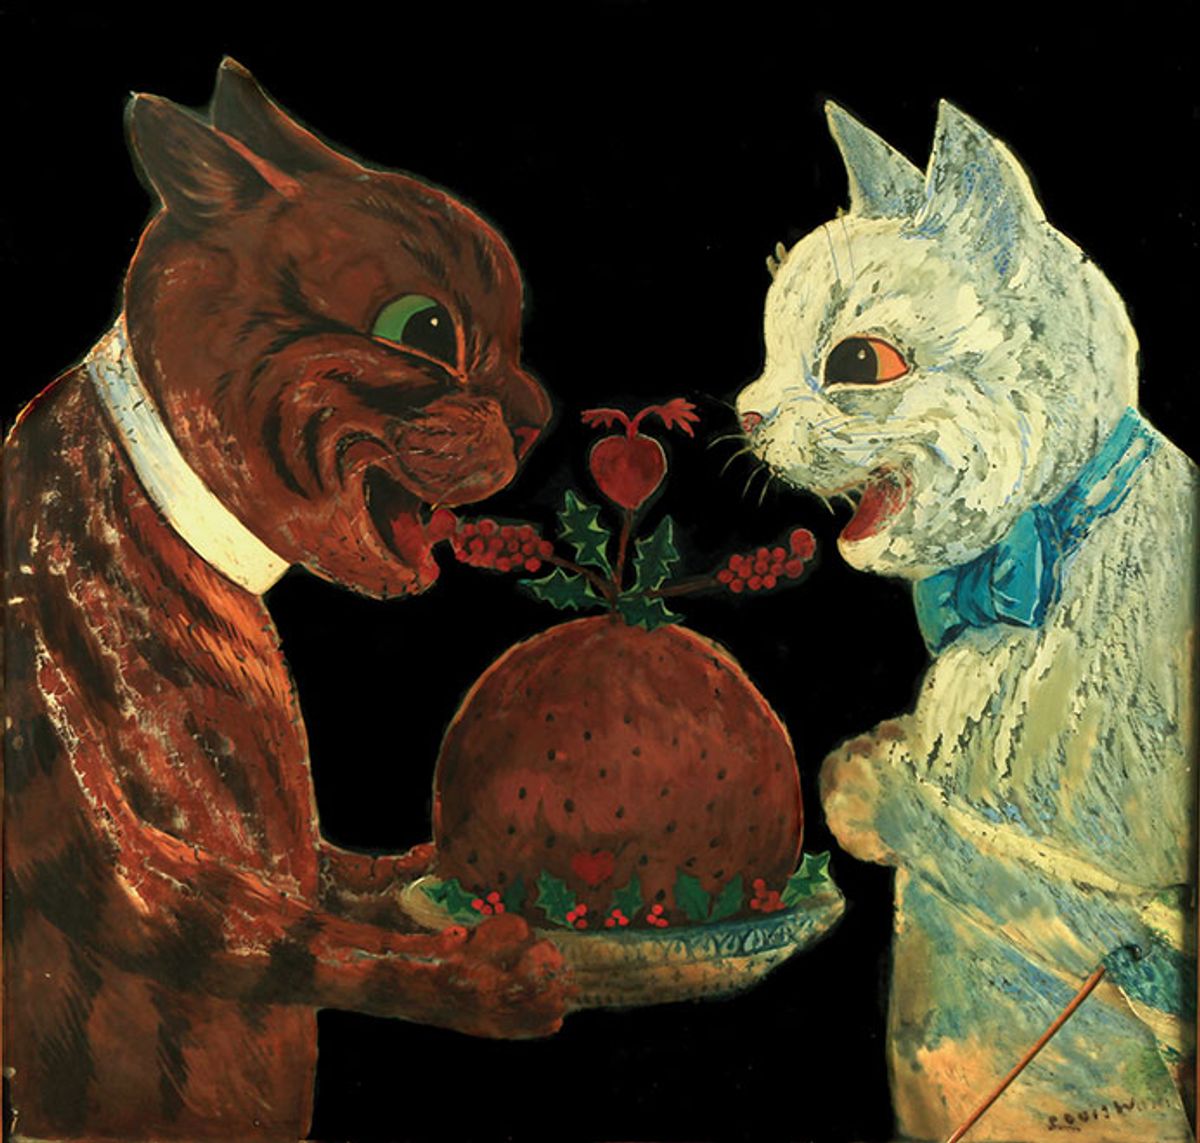 The Electric Life of Louis Wain' inspired by a real cat painter